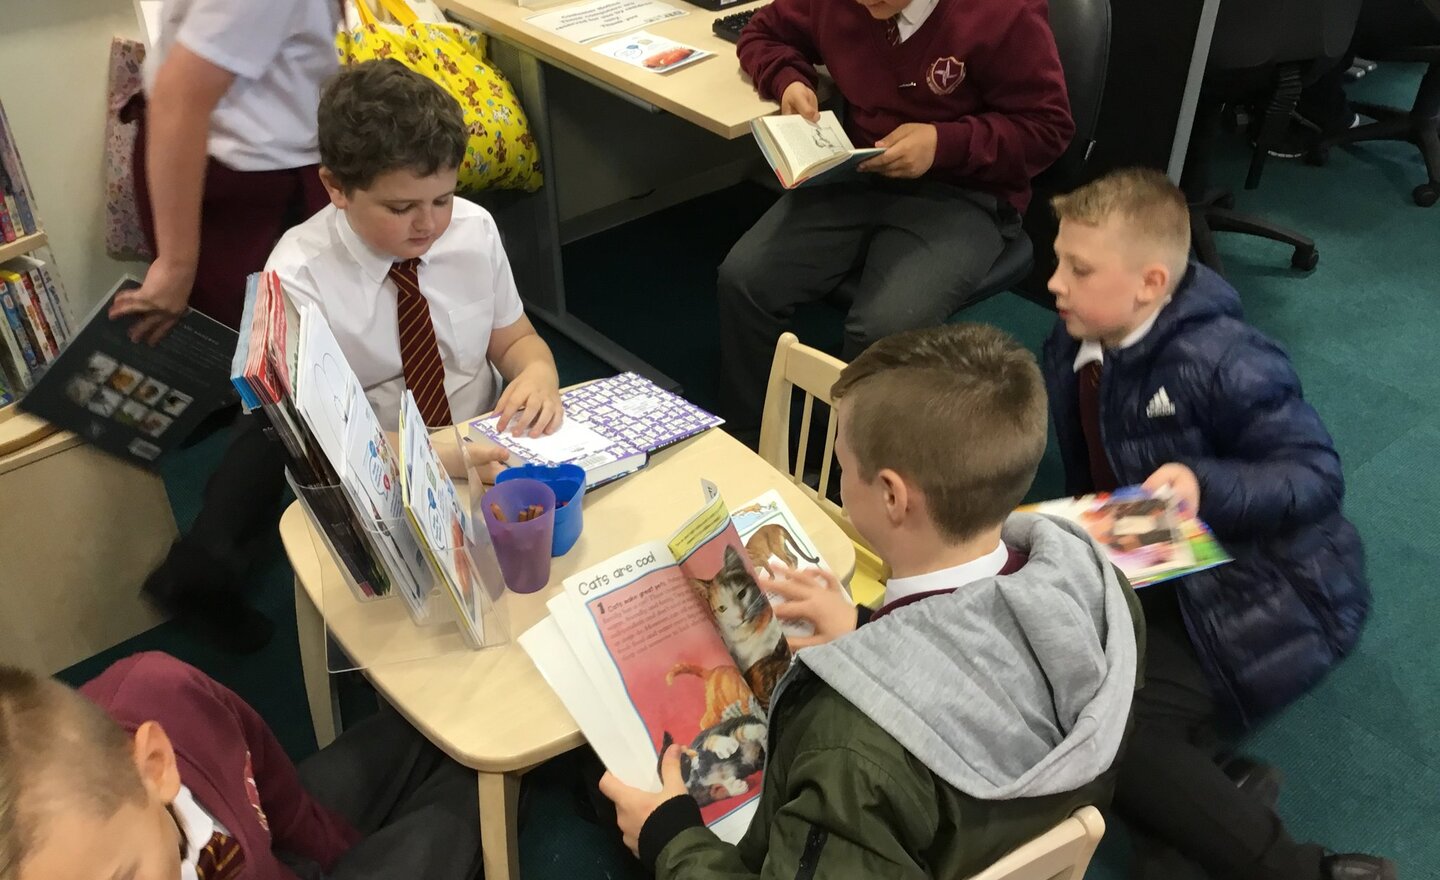 Image of Y6 Library Visit